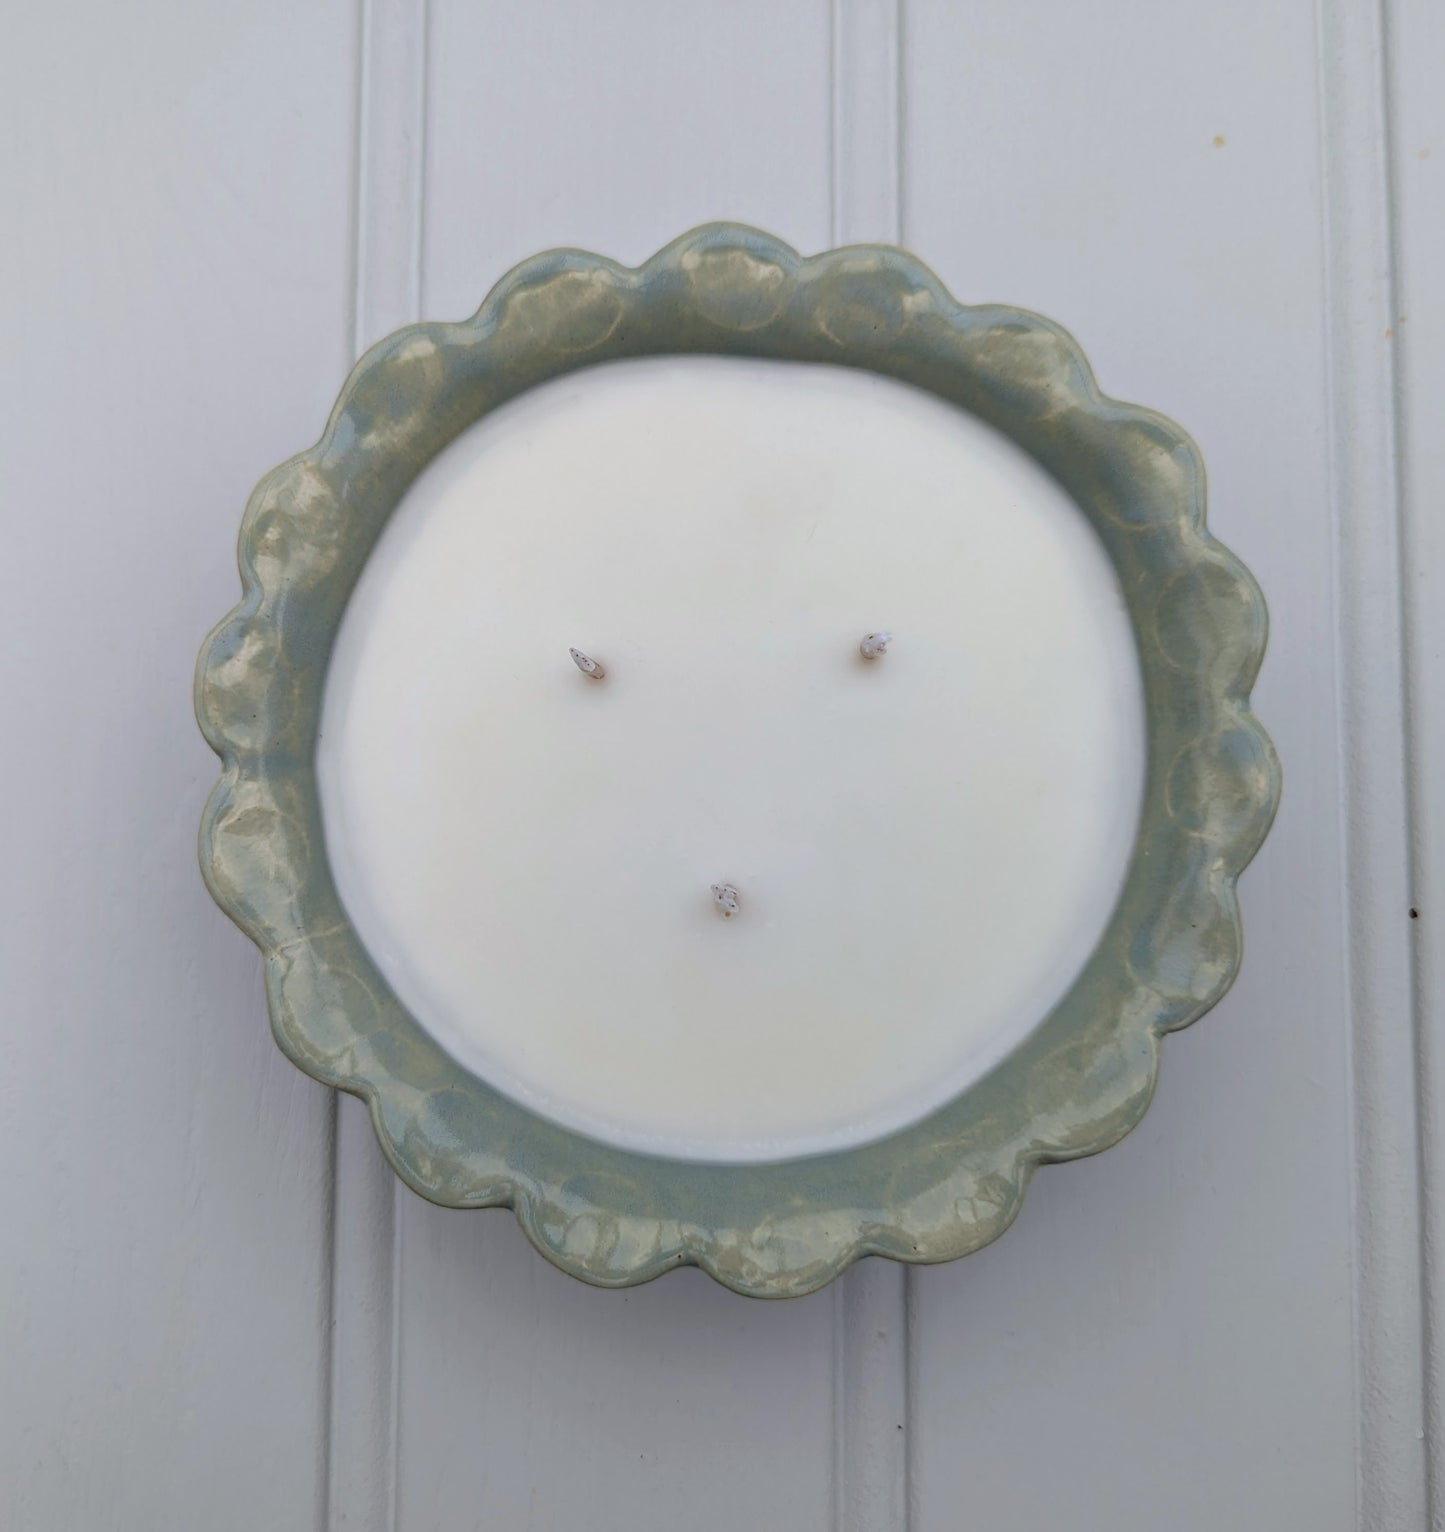 Sea Bramble Ceramics - Handmade, Earthenware 3 wick candle. In Pink, Sage, Baby blue stripes or White, all with Sea Brambles beautiful signature scalloped top. Shown in Sage and viewed from above.